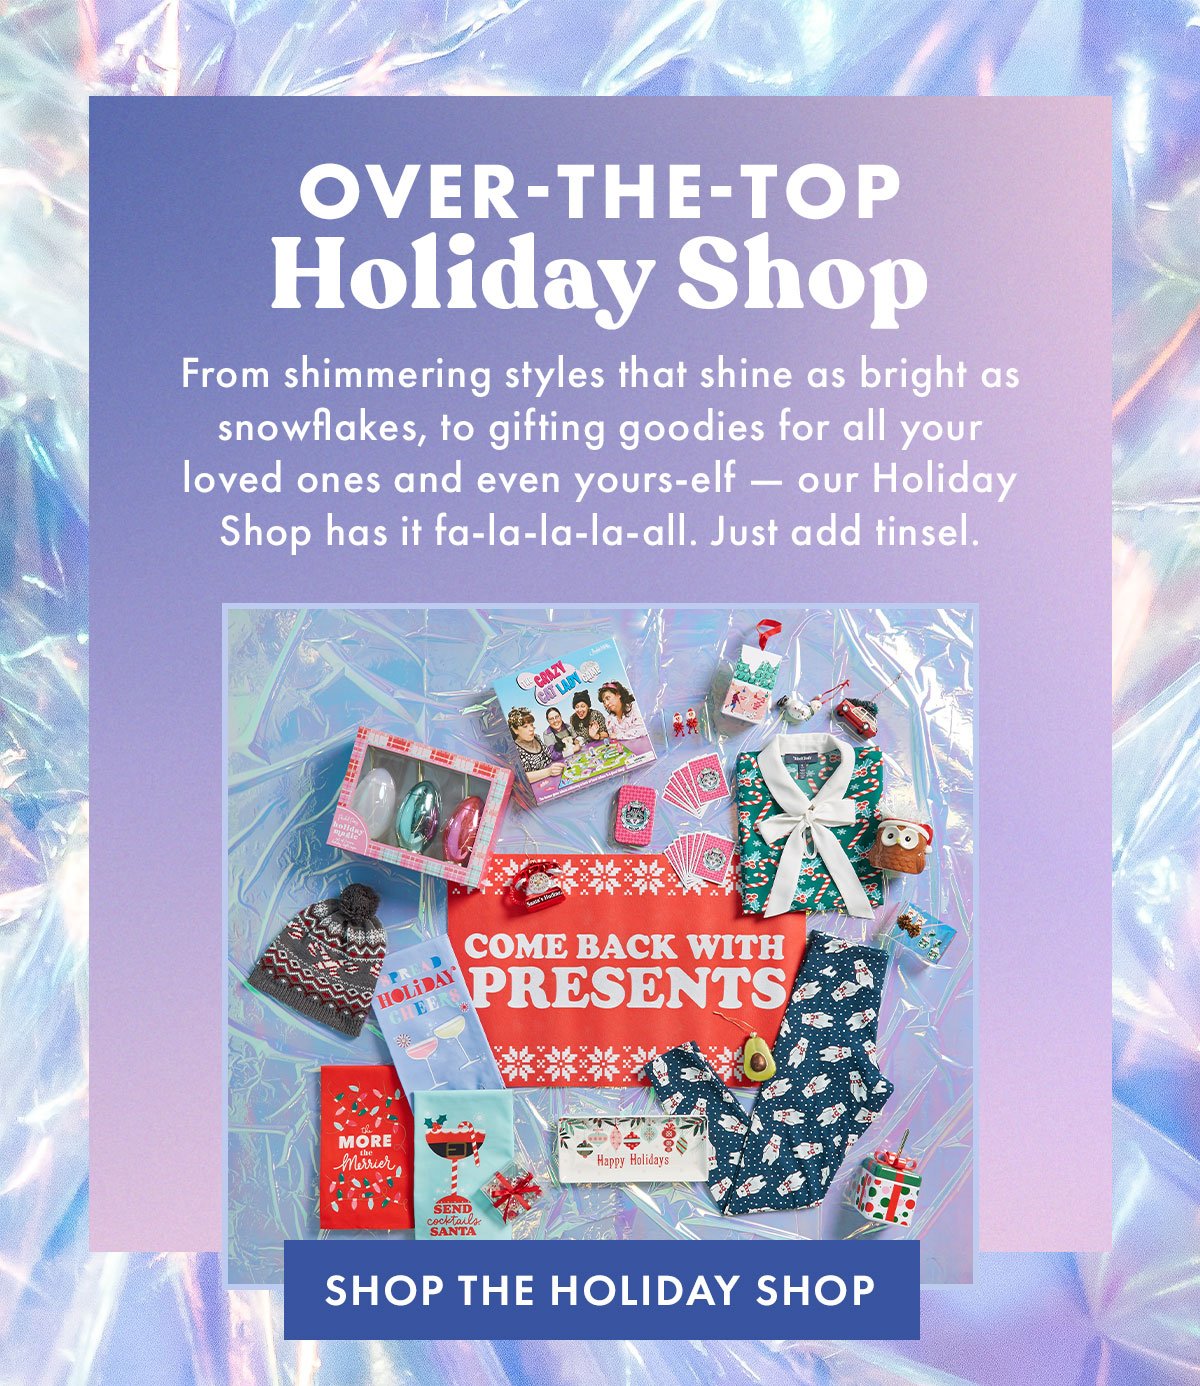 Over-The-Top Holiday Shop